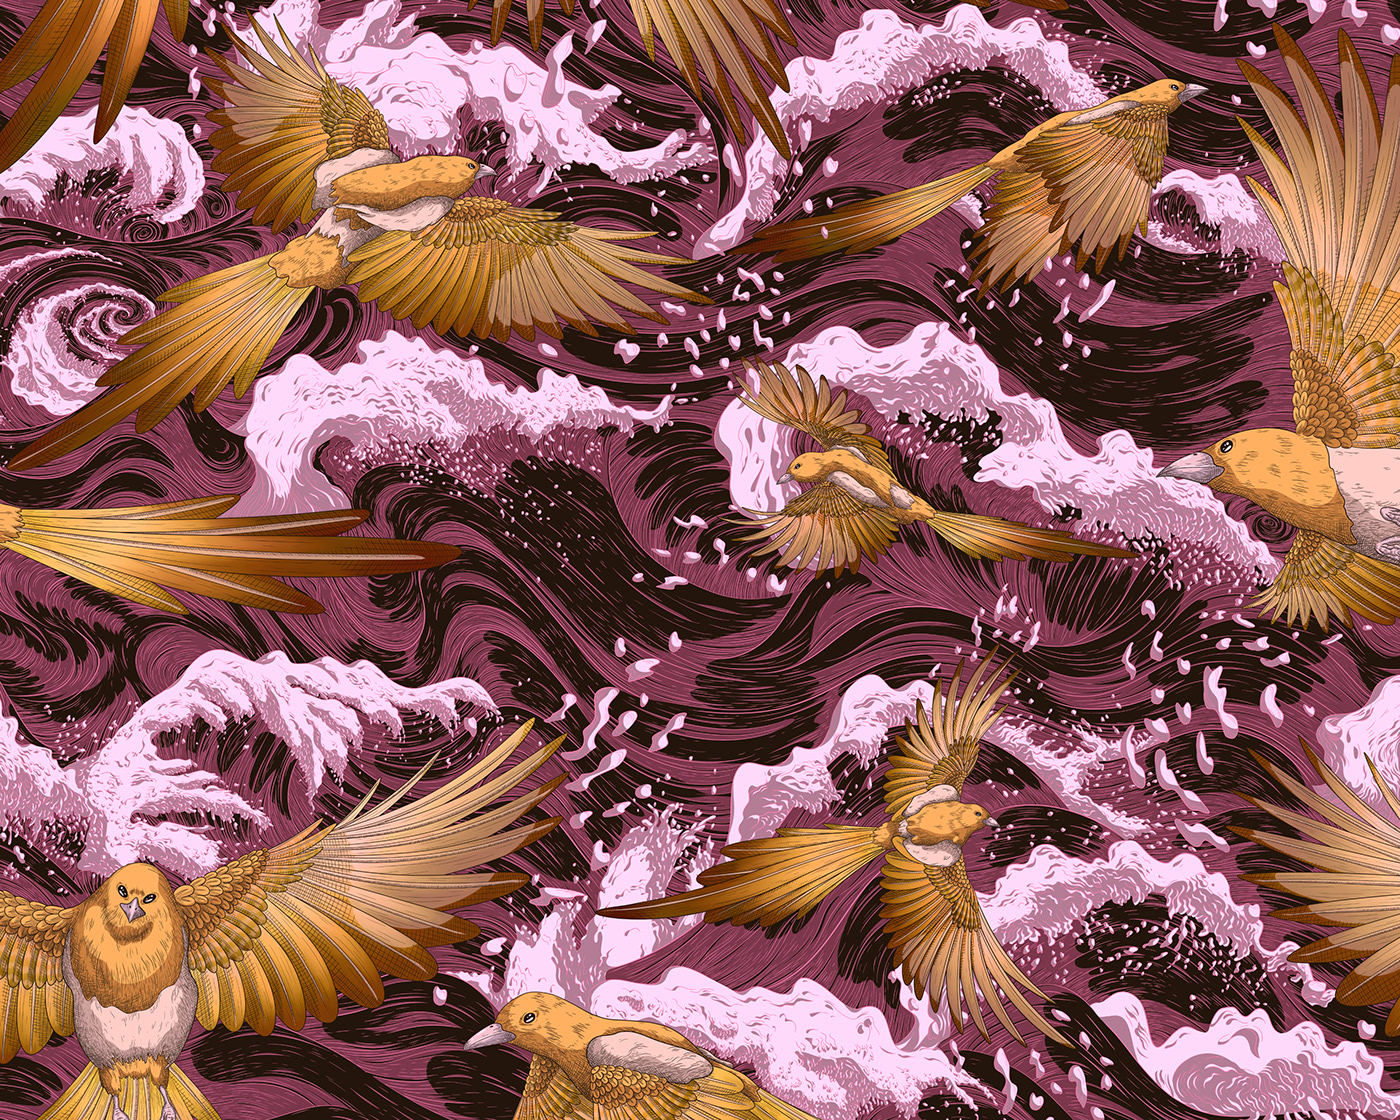 Repeat pattern of golden magpies flying above a deep plum coloured ocean.